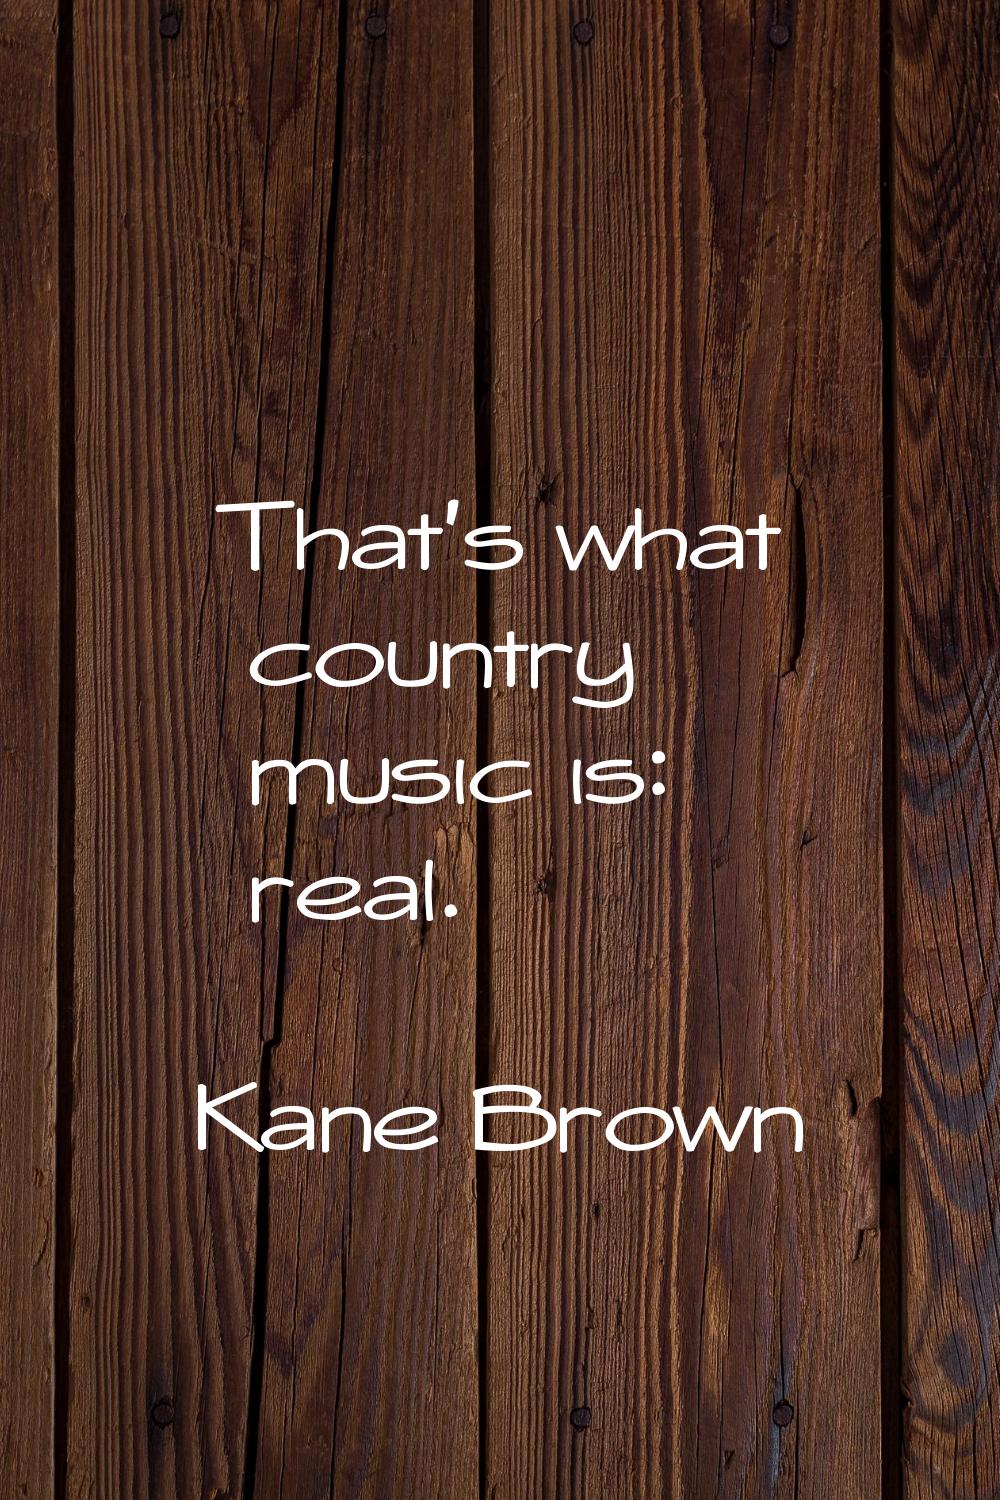 That's what country music is: real.